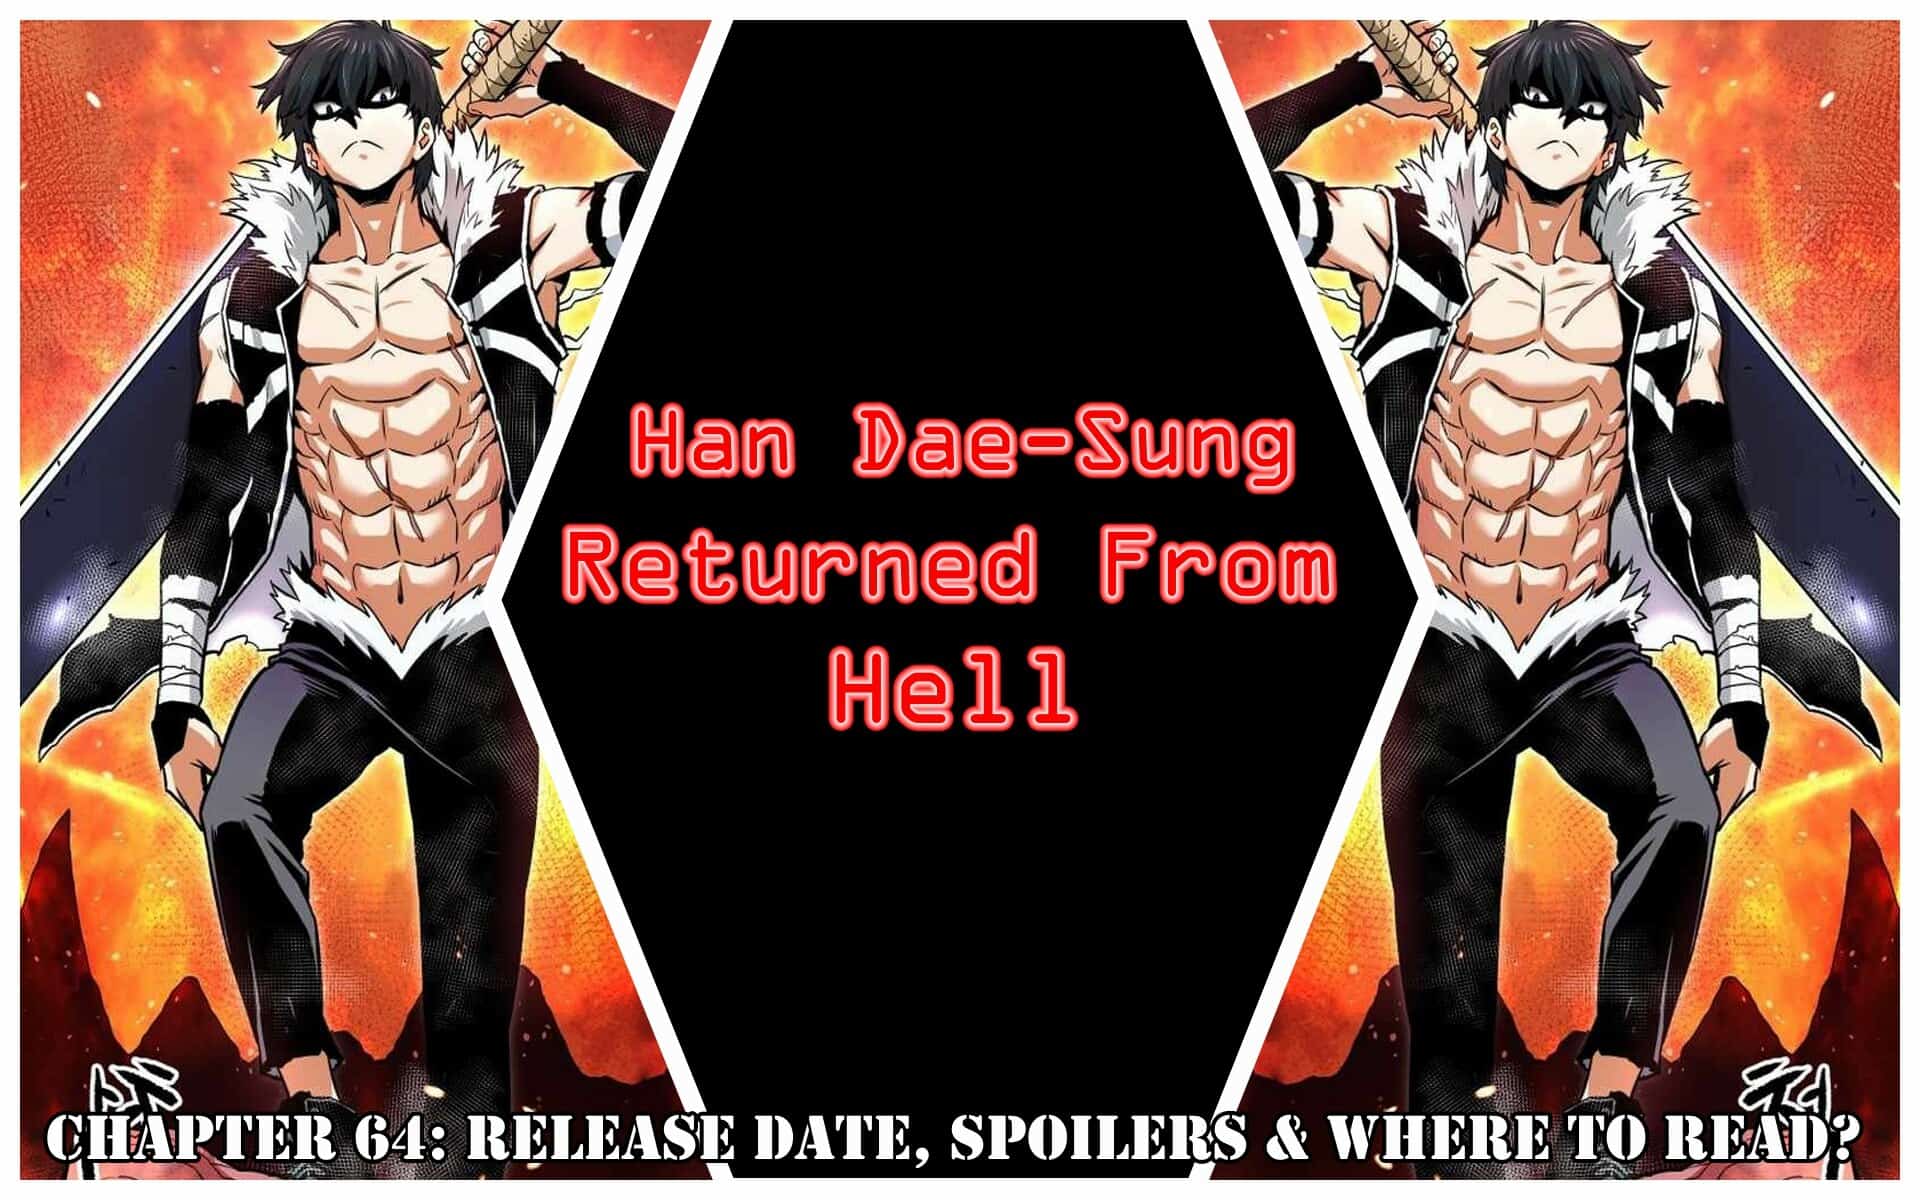 Han Dae-Sung Returned From Hell Chapter 37: Release Date, Spoilers & Where to Read?